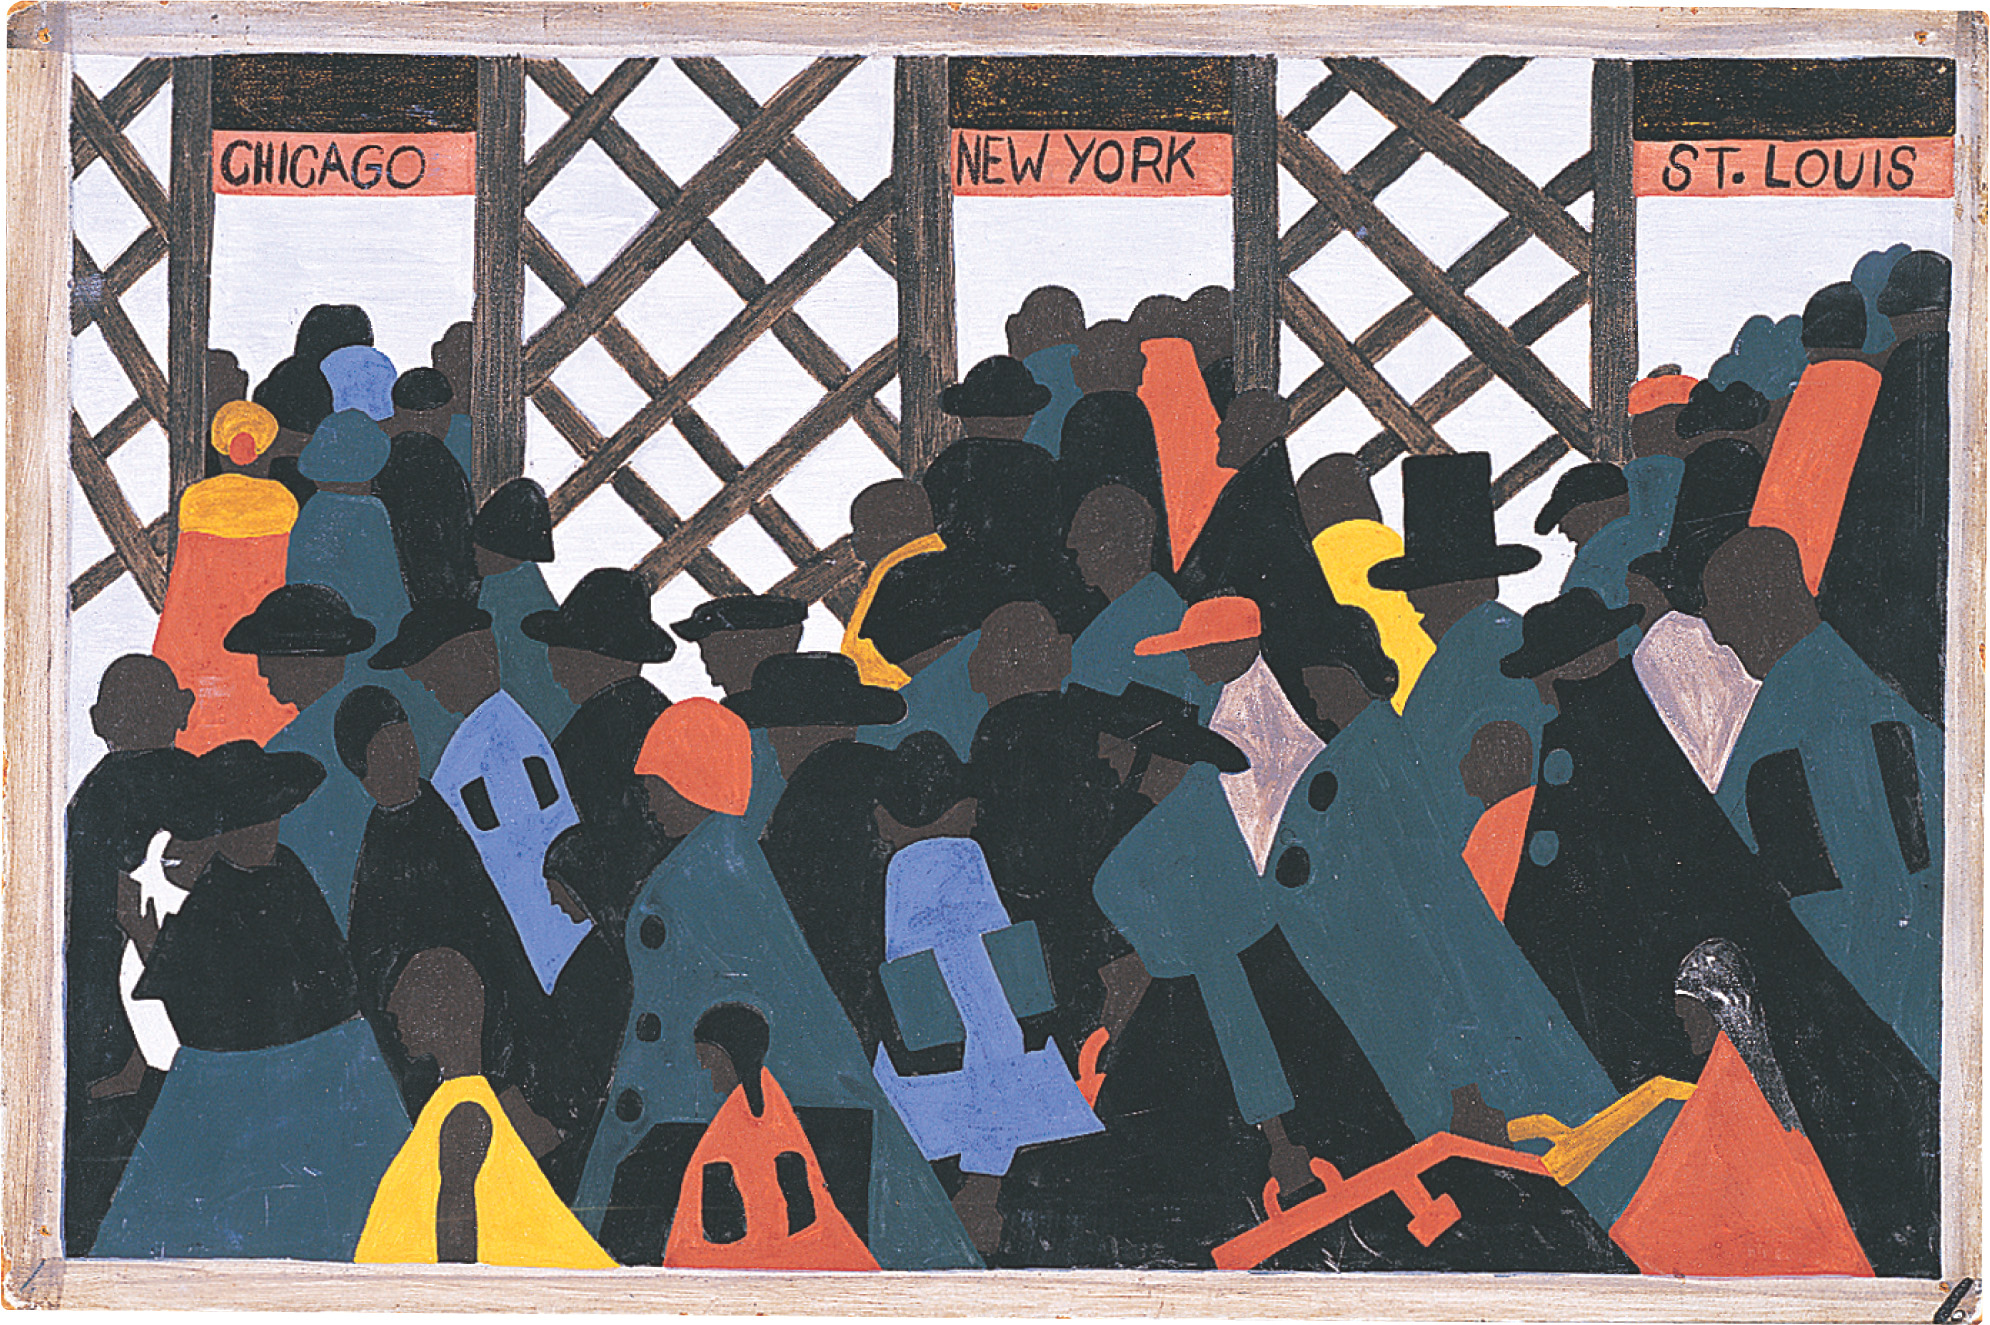 Painting: figures file through gates labeled Chicago, New York, and St. Louis